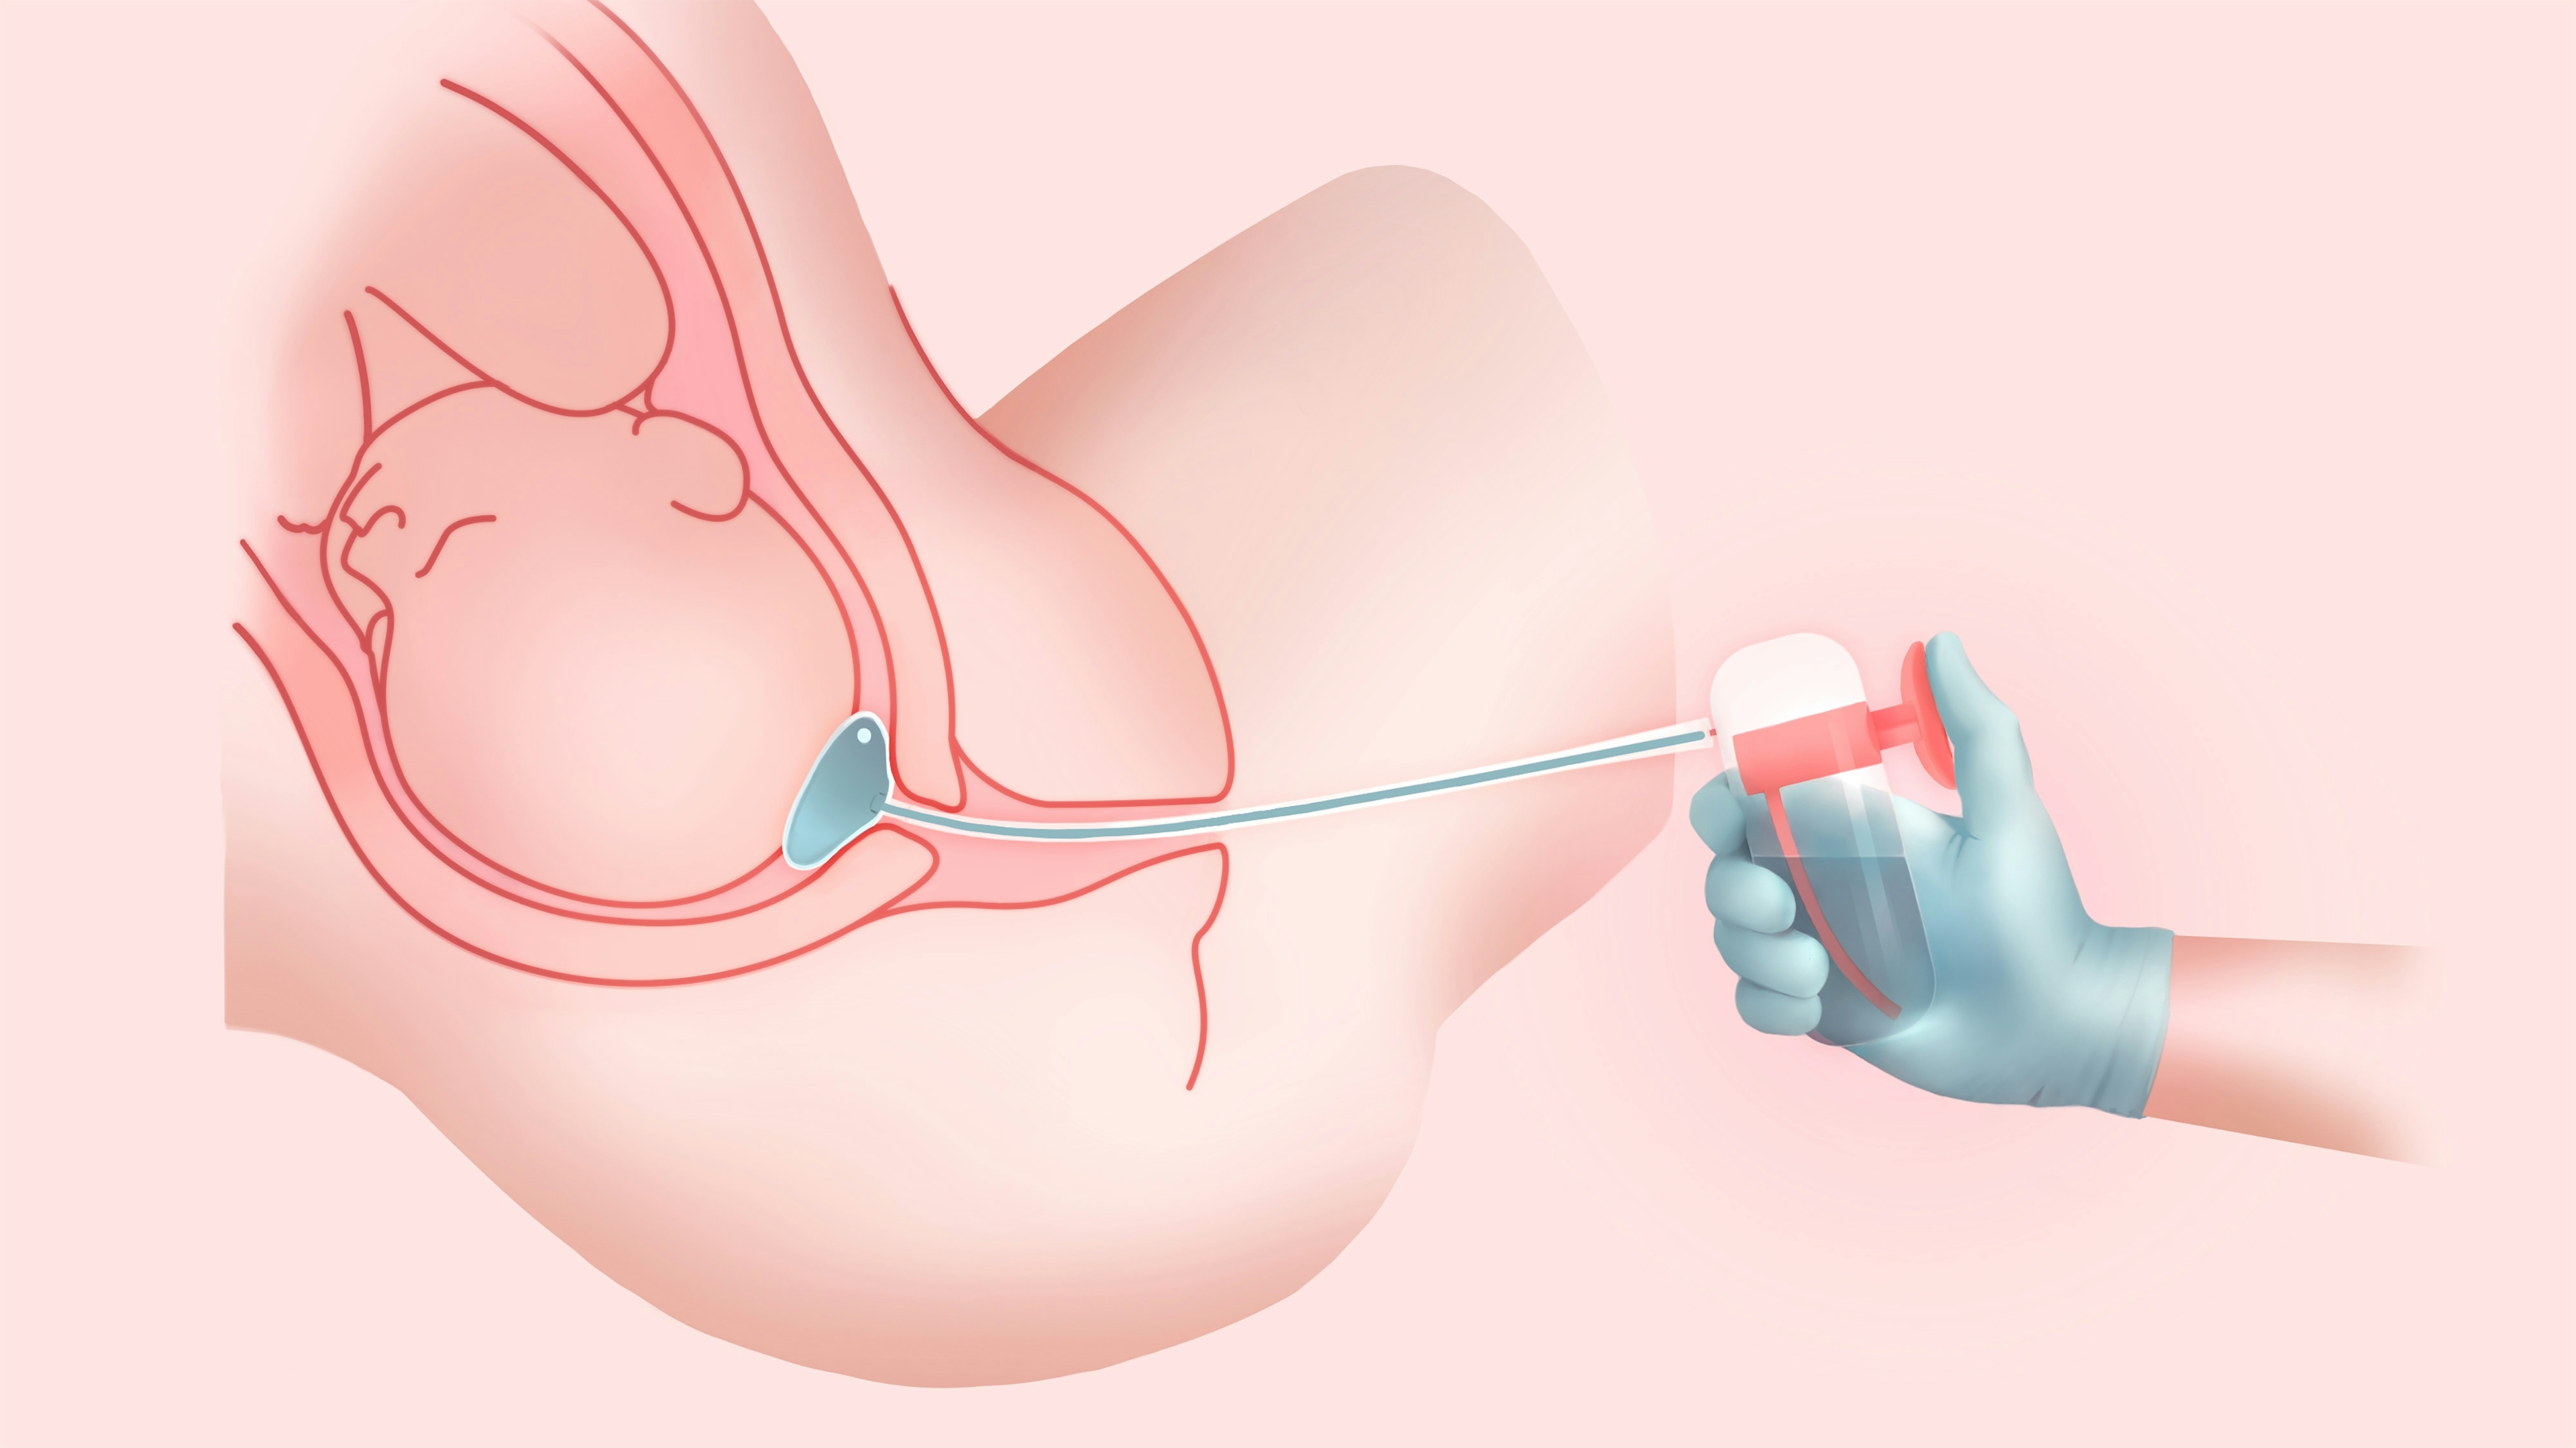 Pregnant person and doctors hand displaying how the tool works. Illustration.